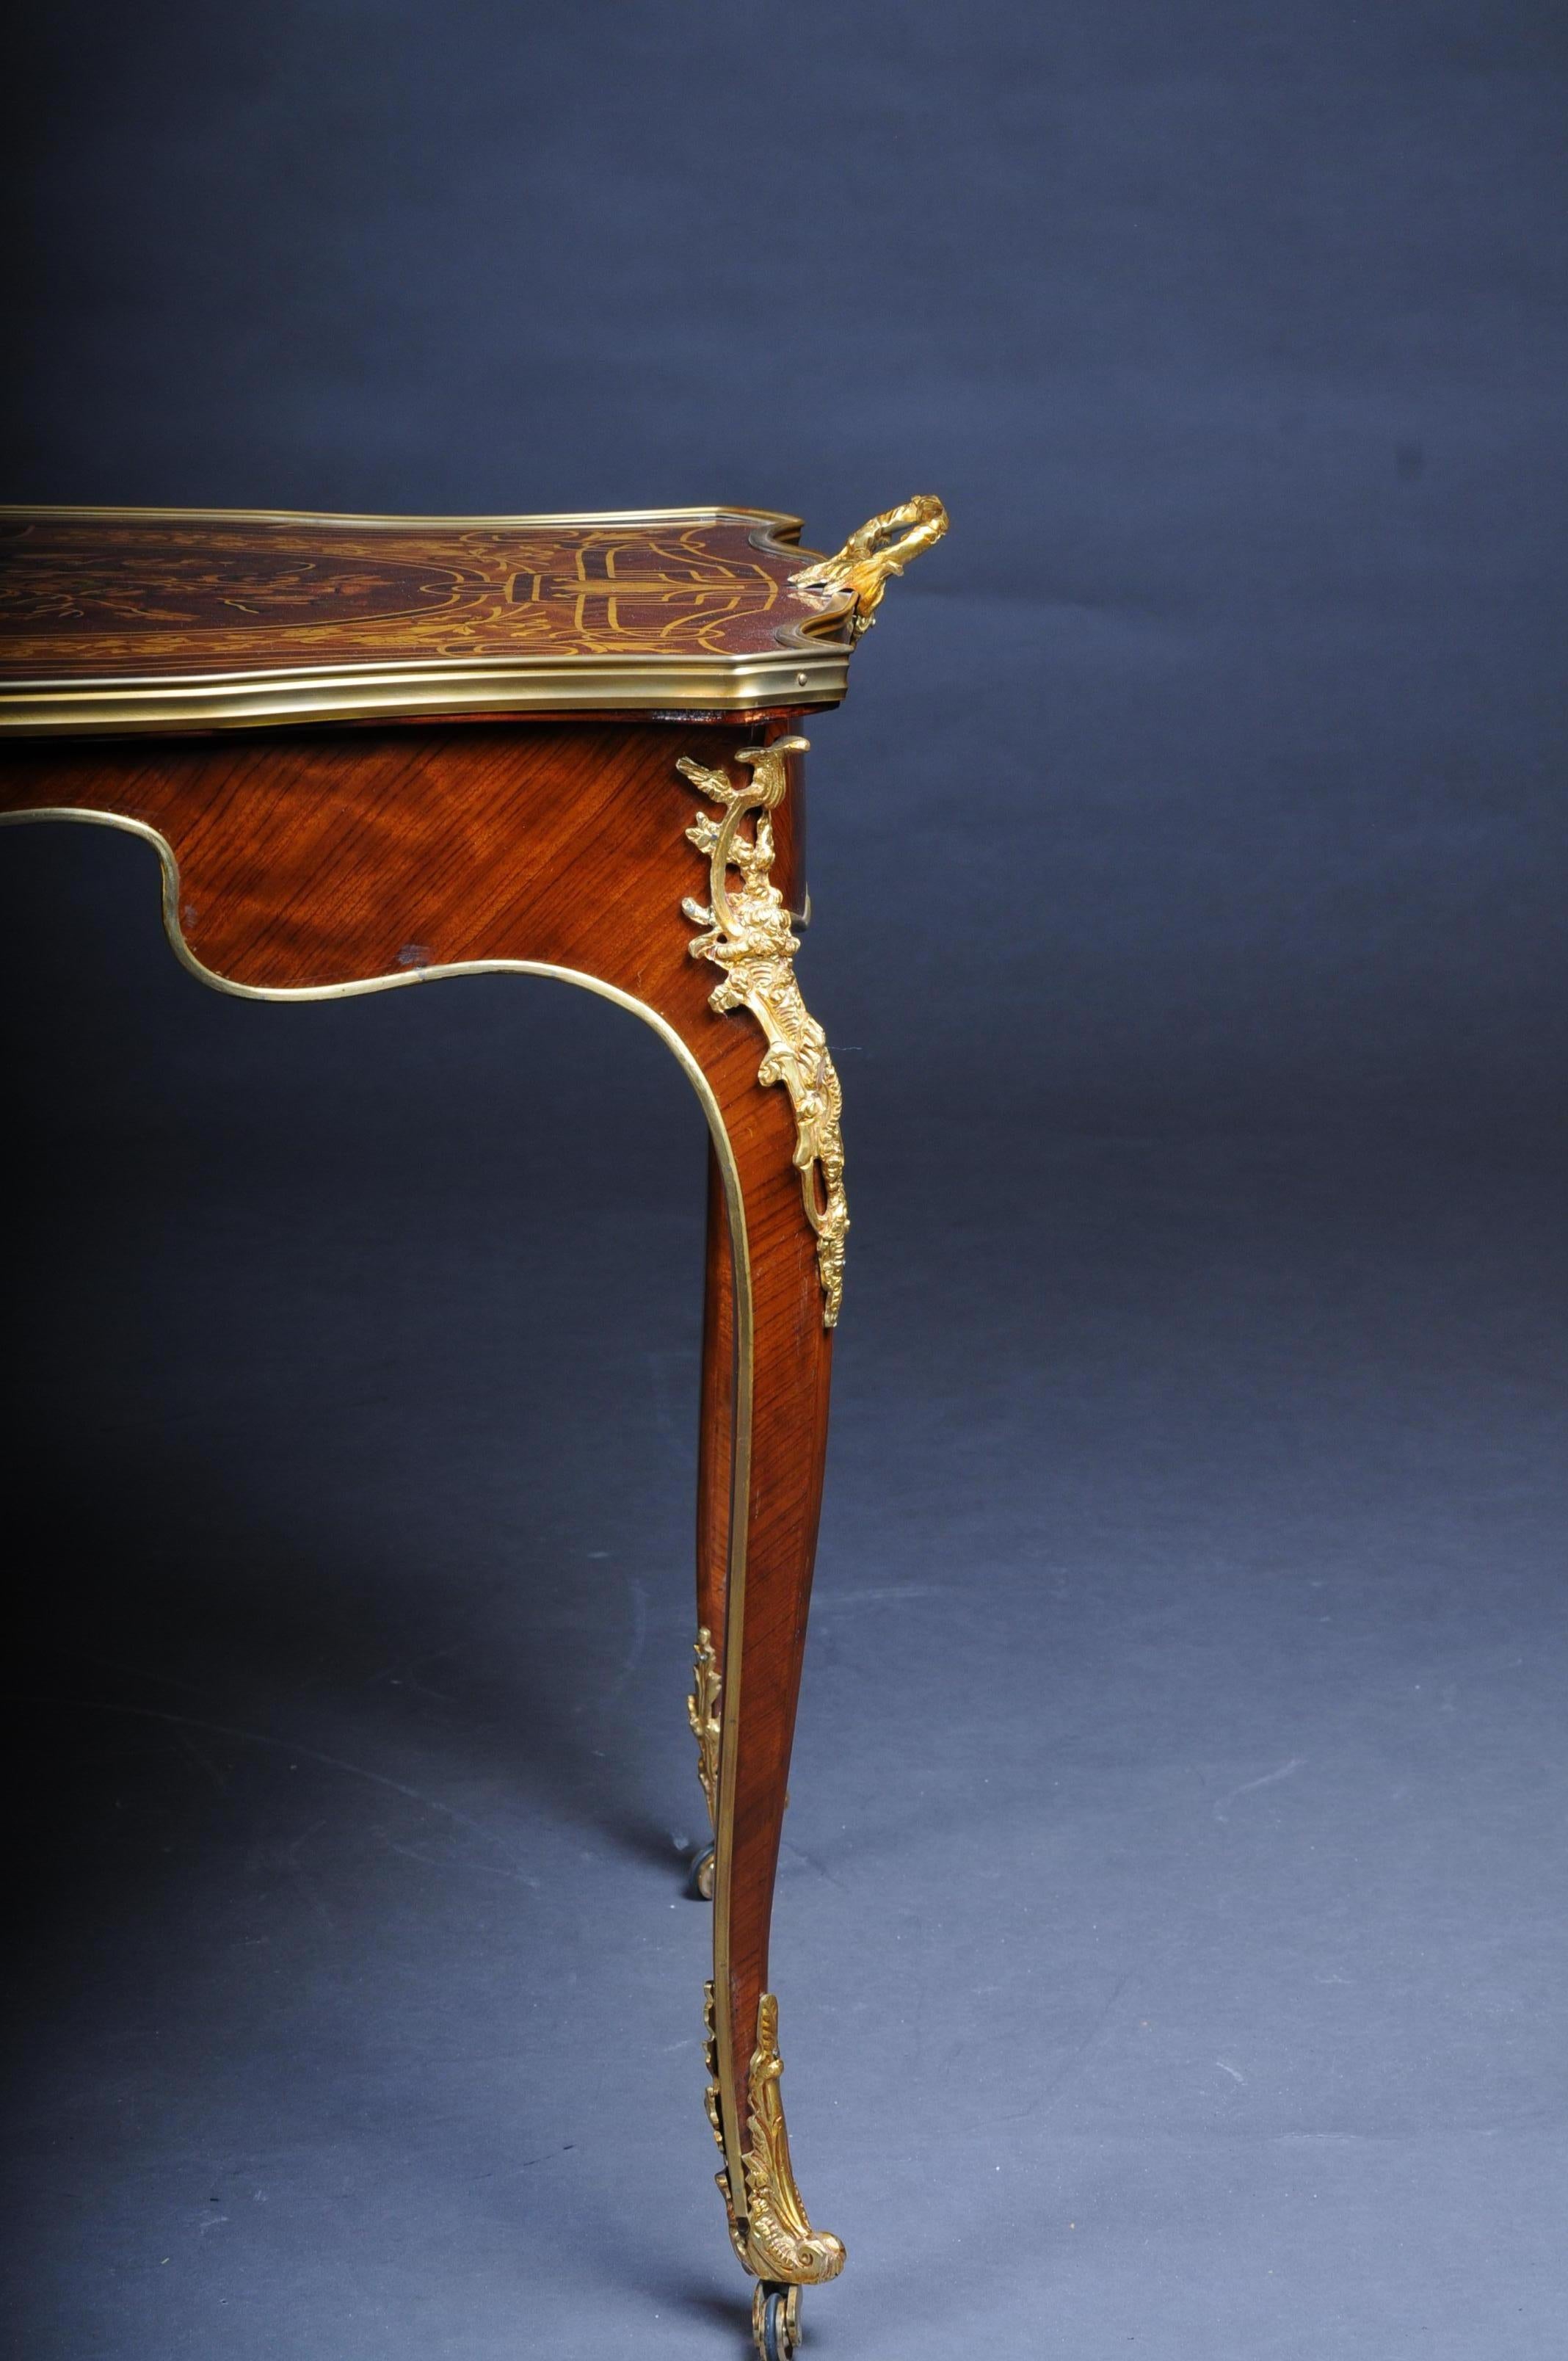 Elegant French salon table in Louis Quinze style.
Rose veneer on solid wood. Ending high, curved square legs in sabots. Slightly overhanging, framed in wide, matching profiles, tabletop with inset filigree maple inlays. Full-surface mirrored veneer